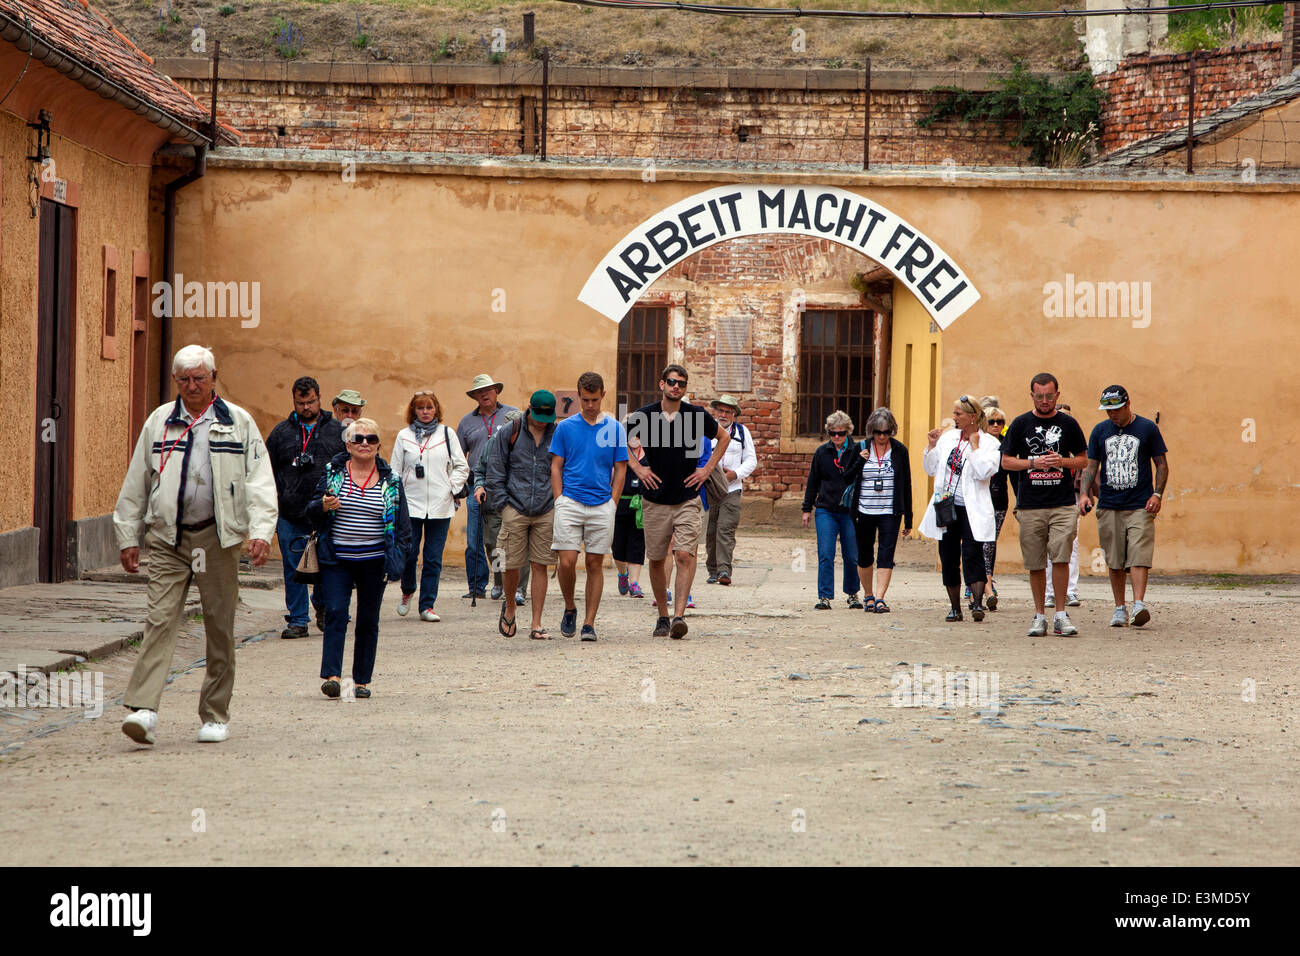 Terezin Concentration Camp, People, Tourists visit Small Fortress  Arbeit Macht Frei above the gate Czech Republic Europe Stock Photo